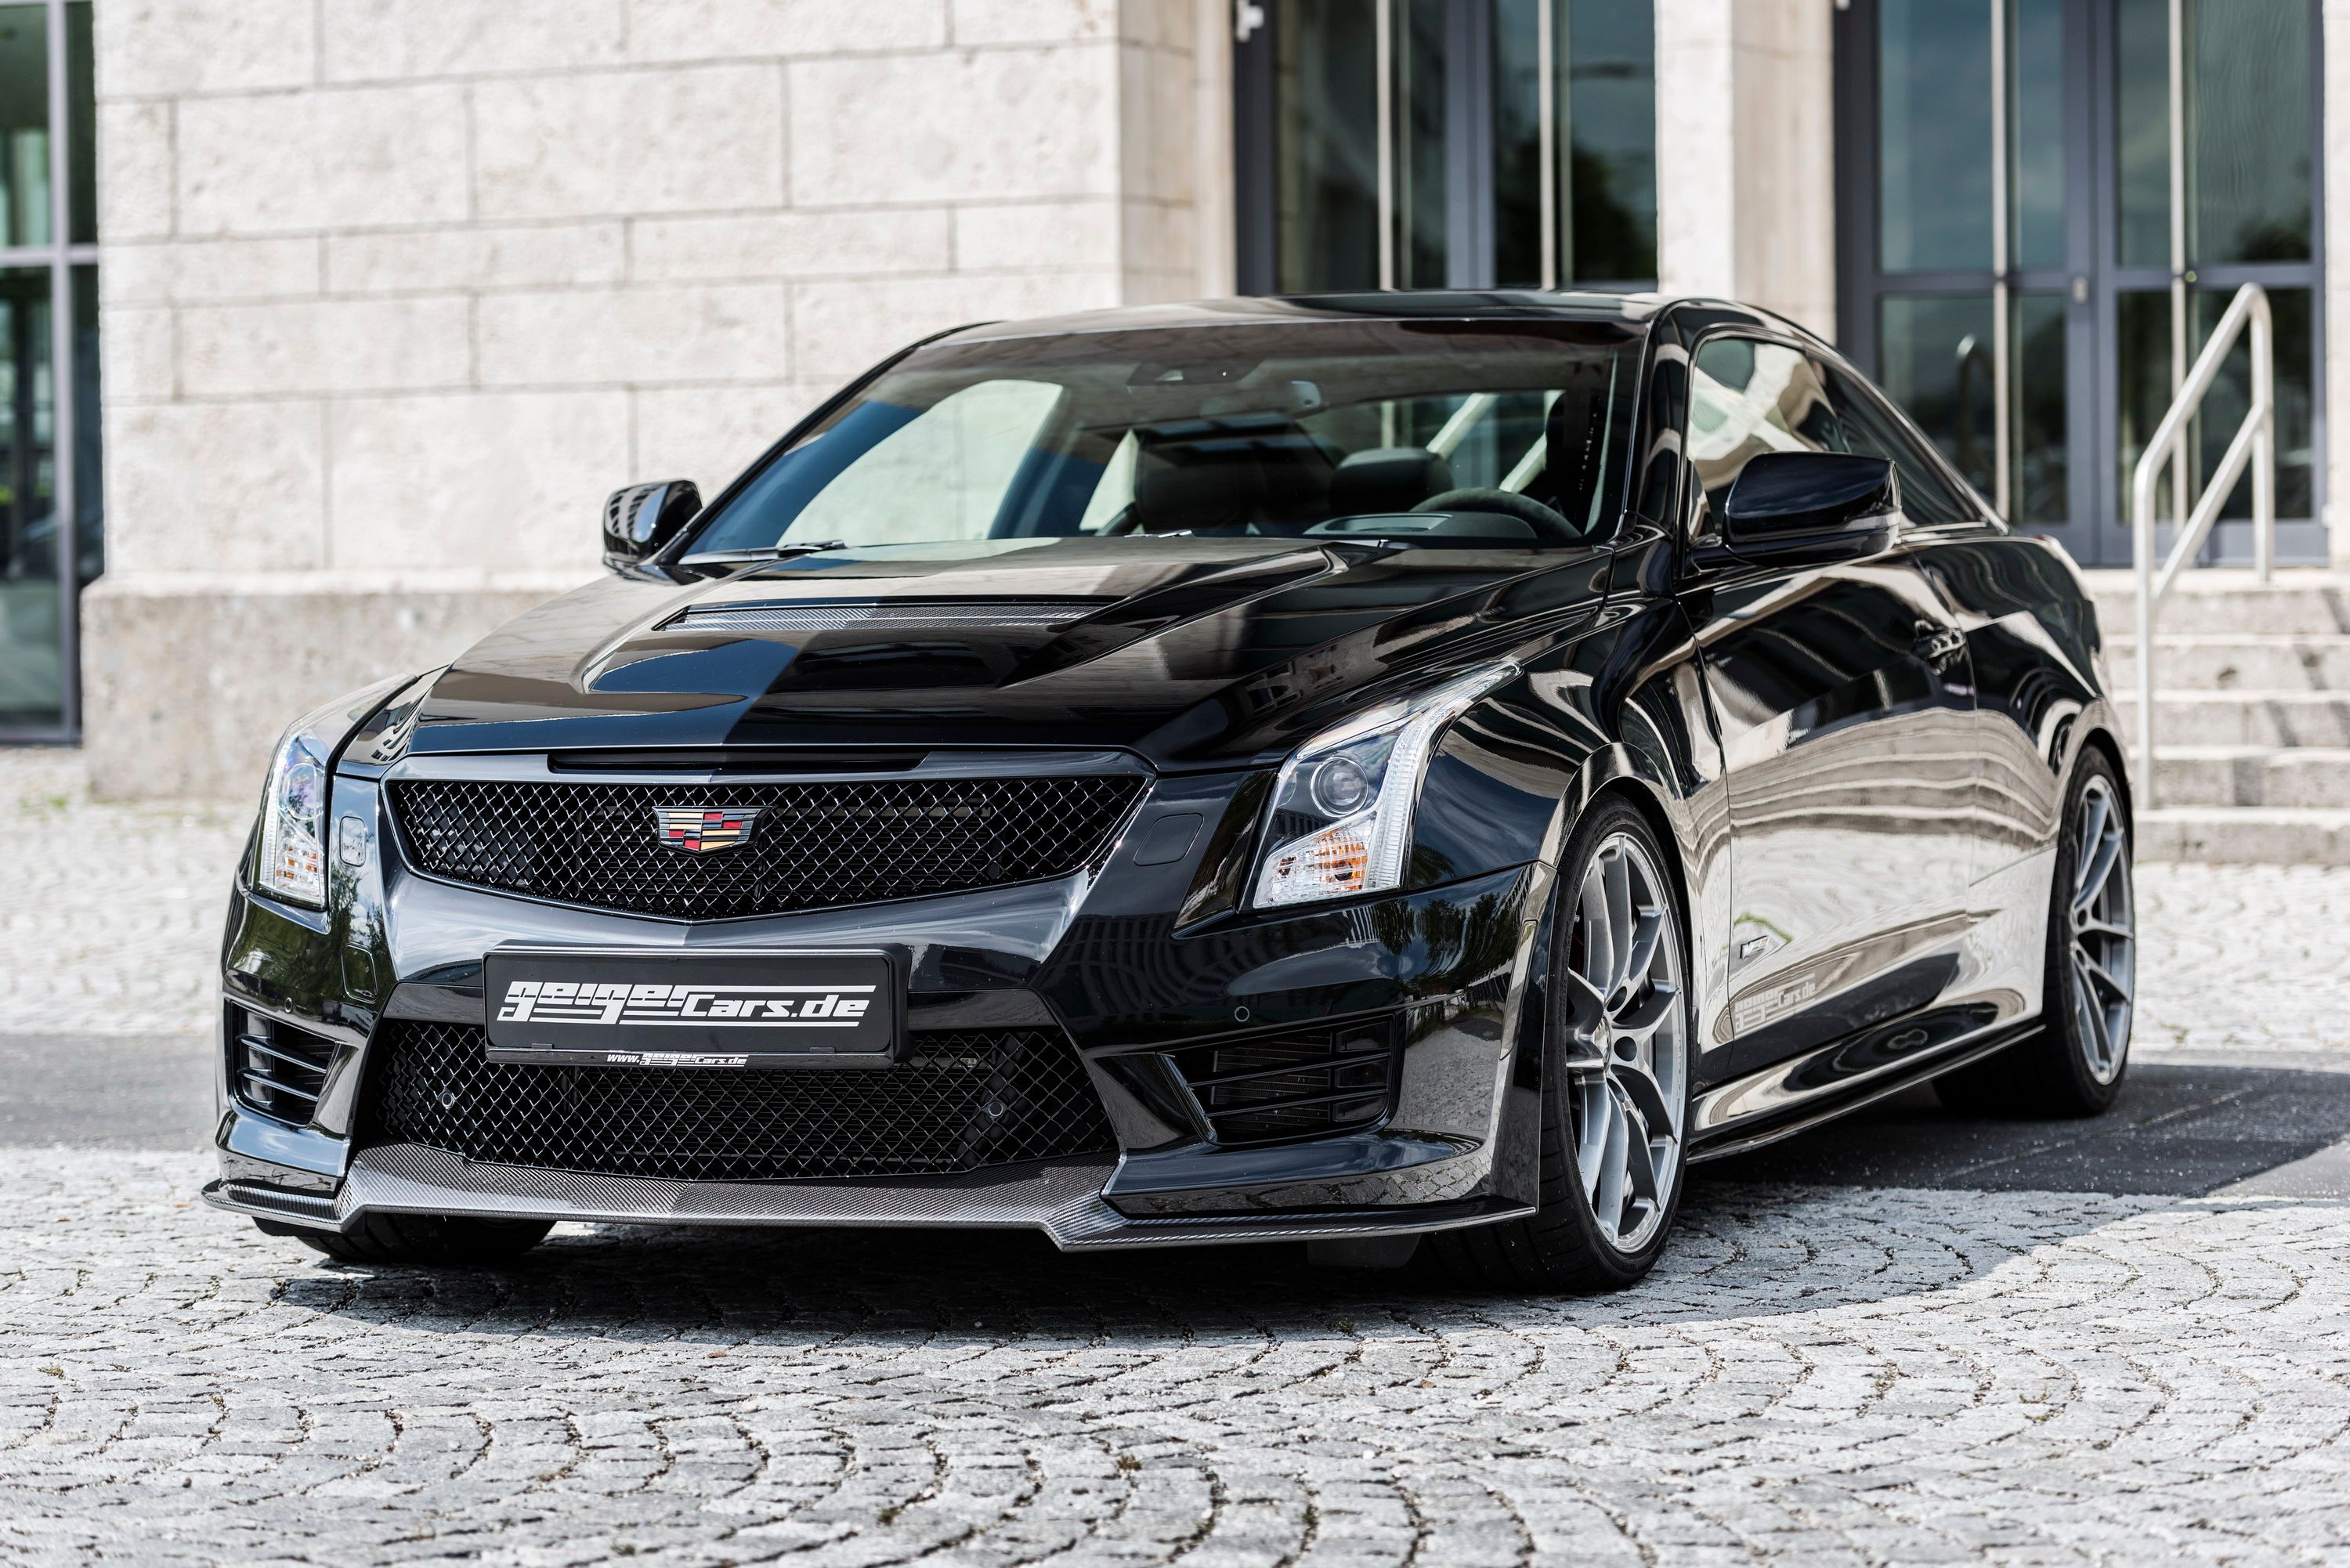 2016 Cadillac ATS-V Coupe Twin Turbo Black Line by Geiger Cars